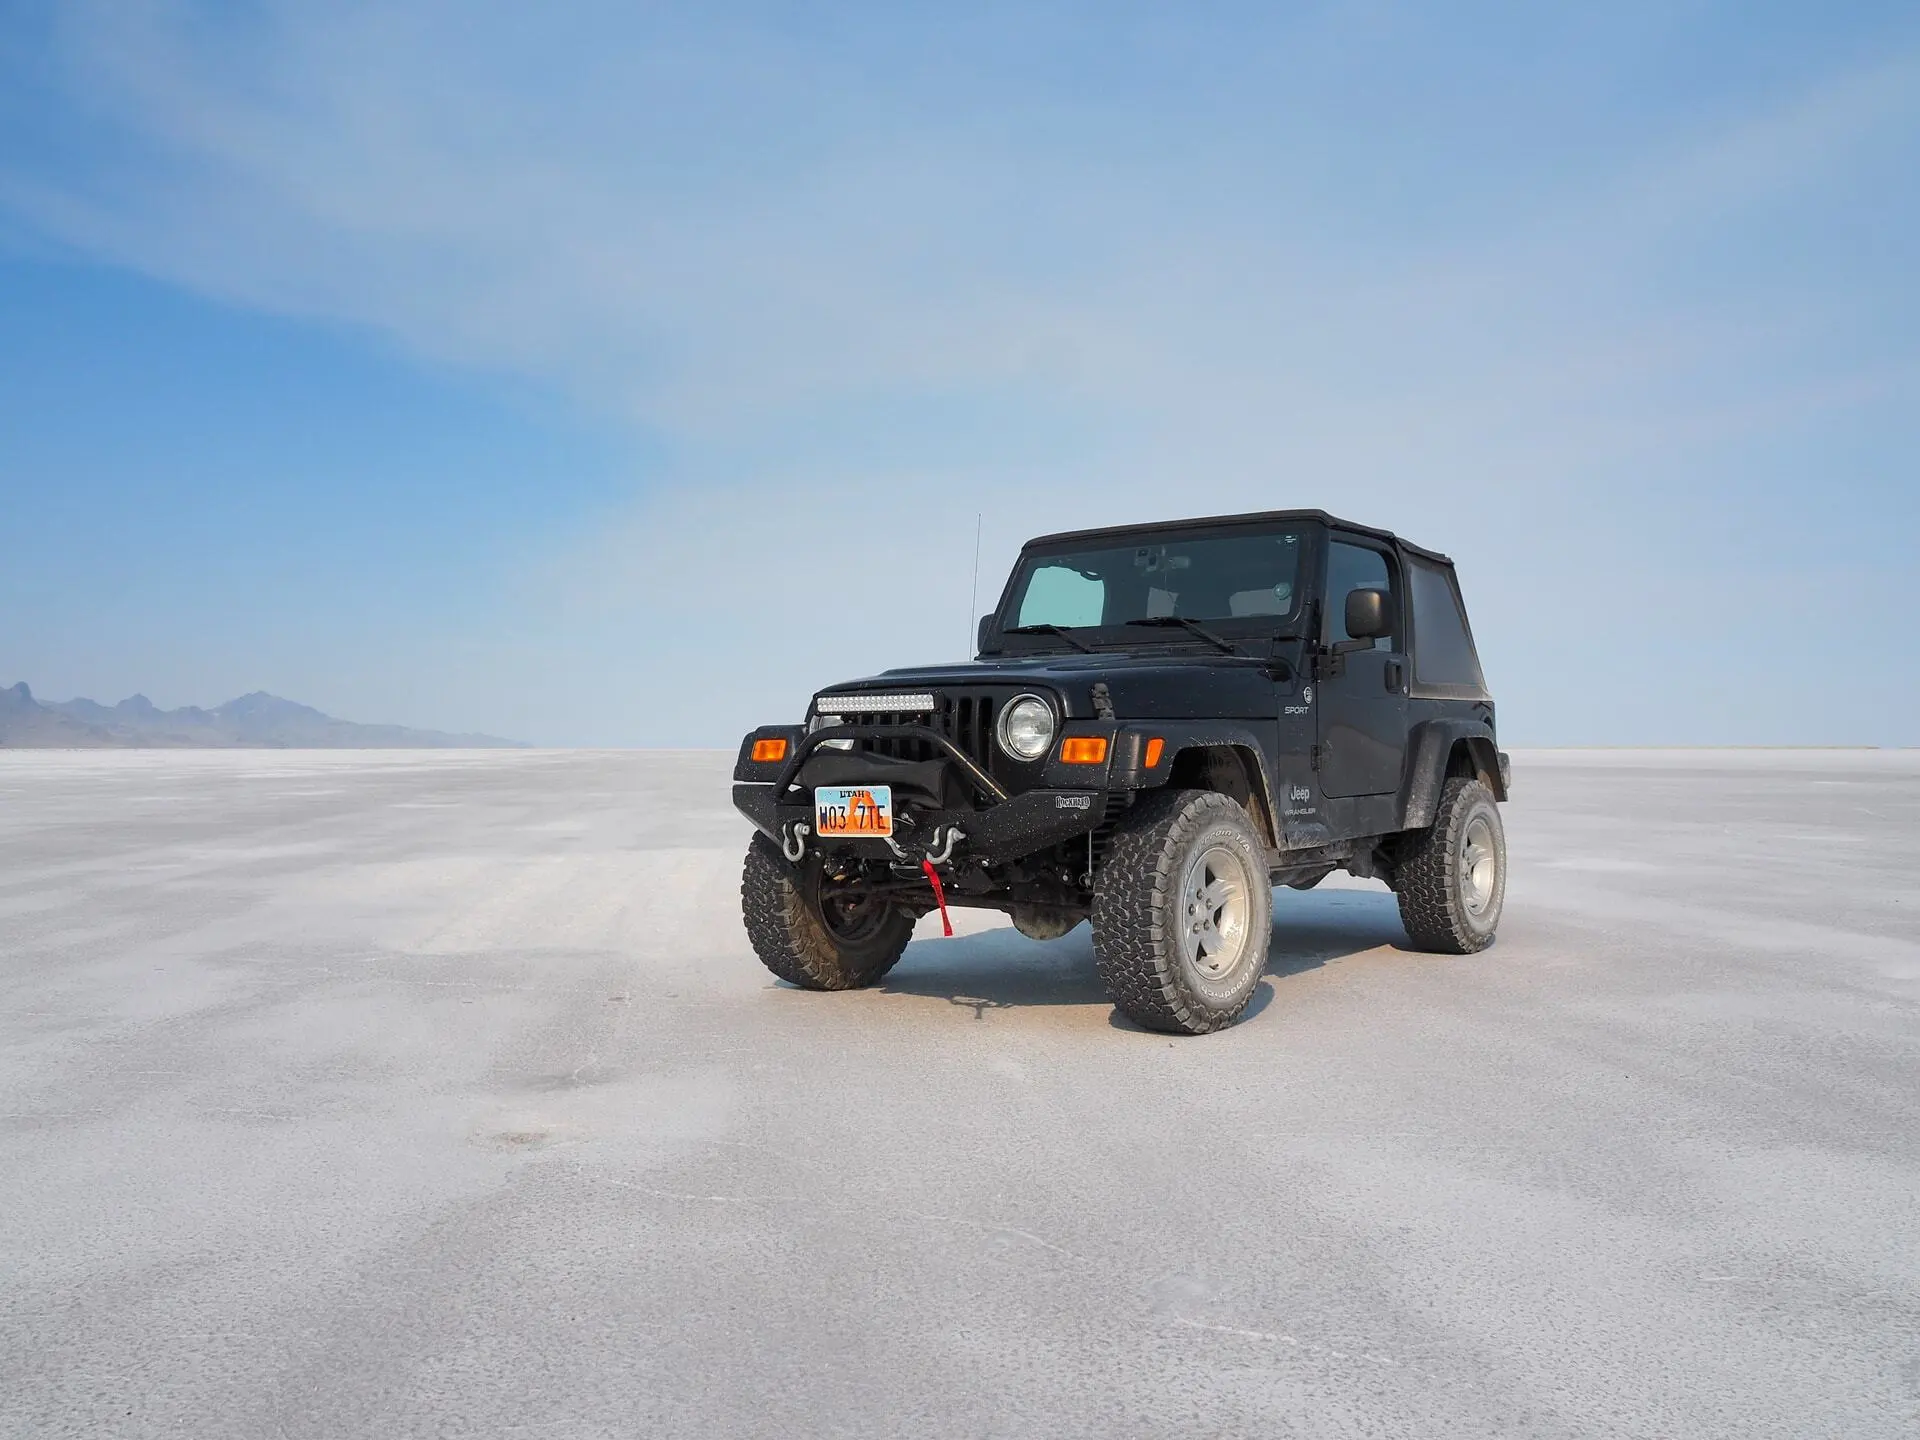 Our Jeep is parked out in the middle of the Bonneville Raceway